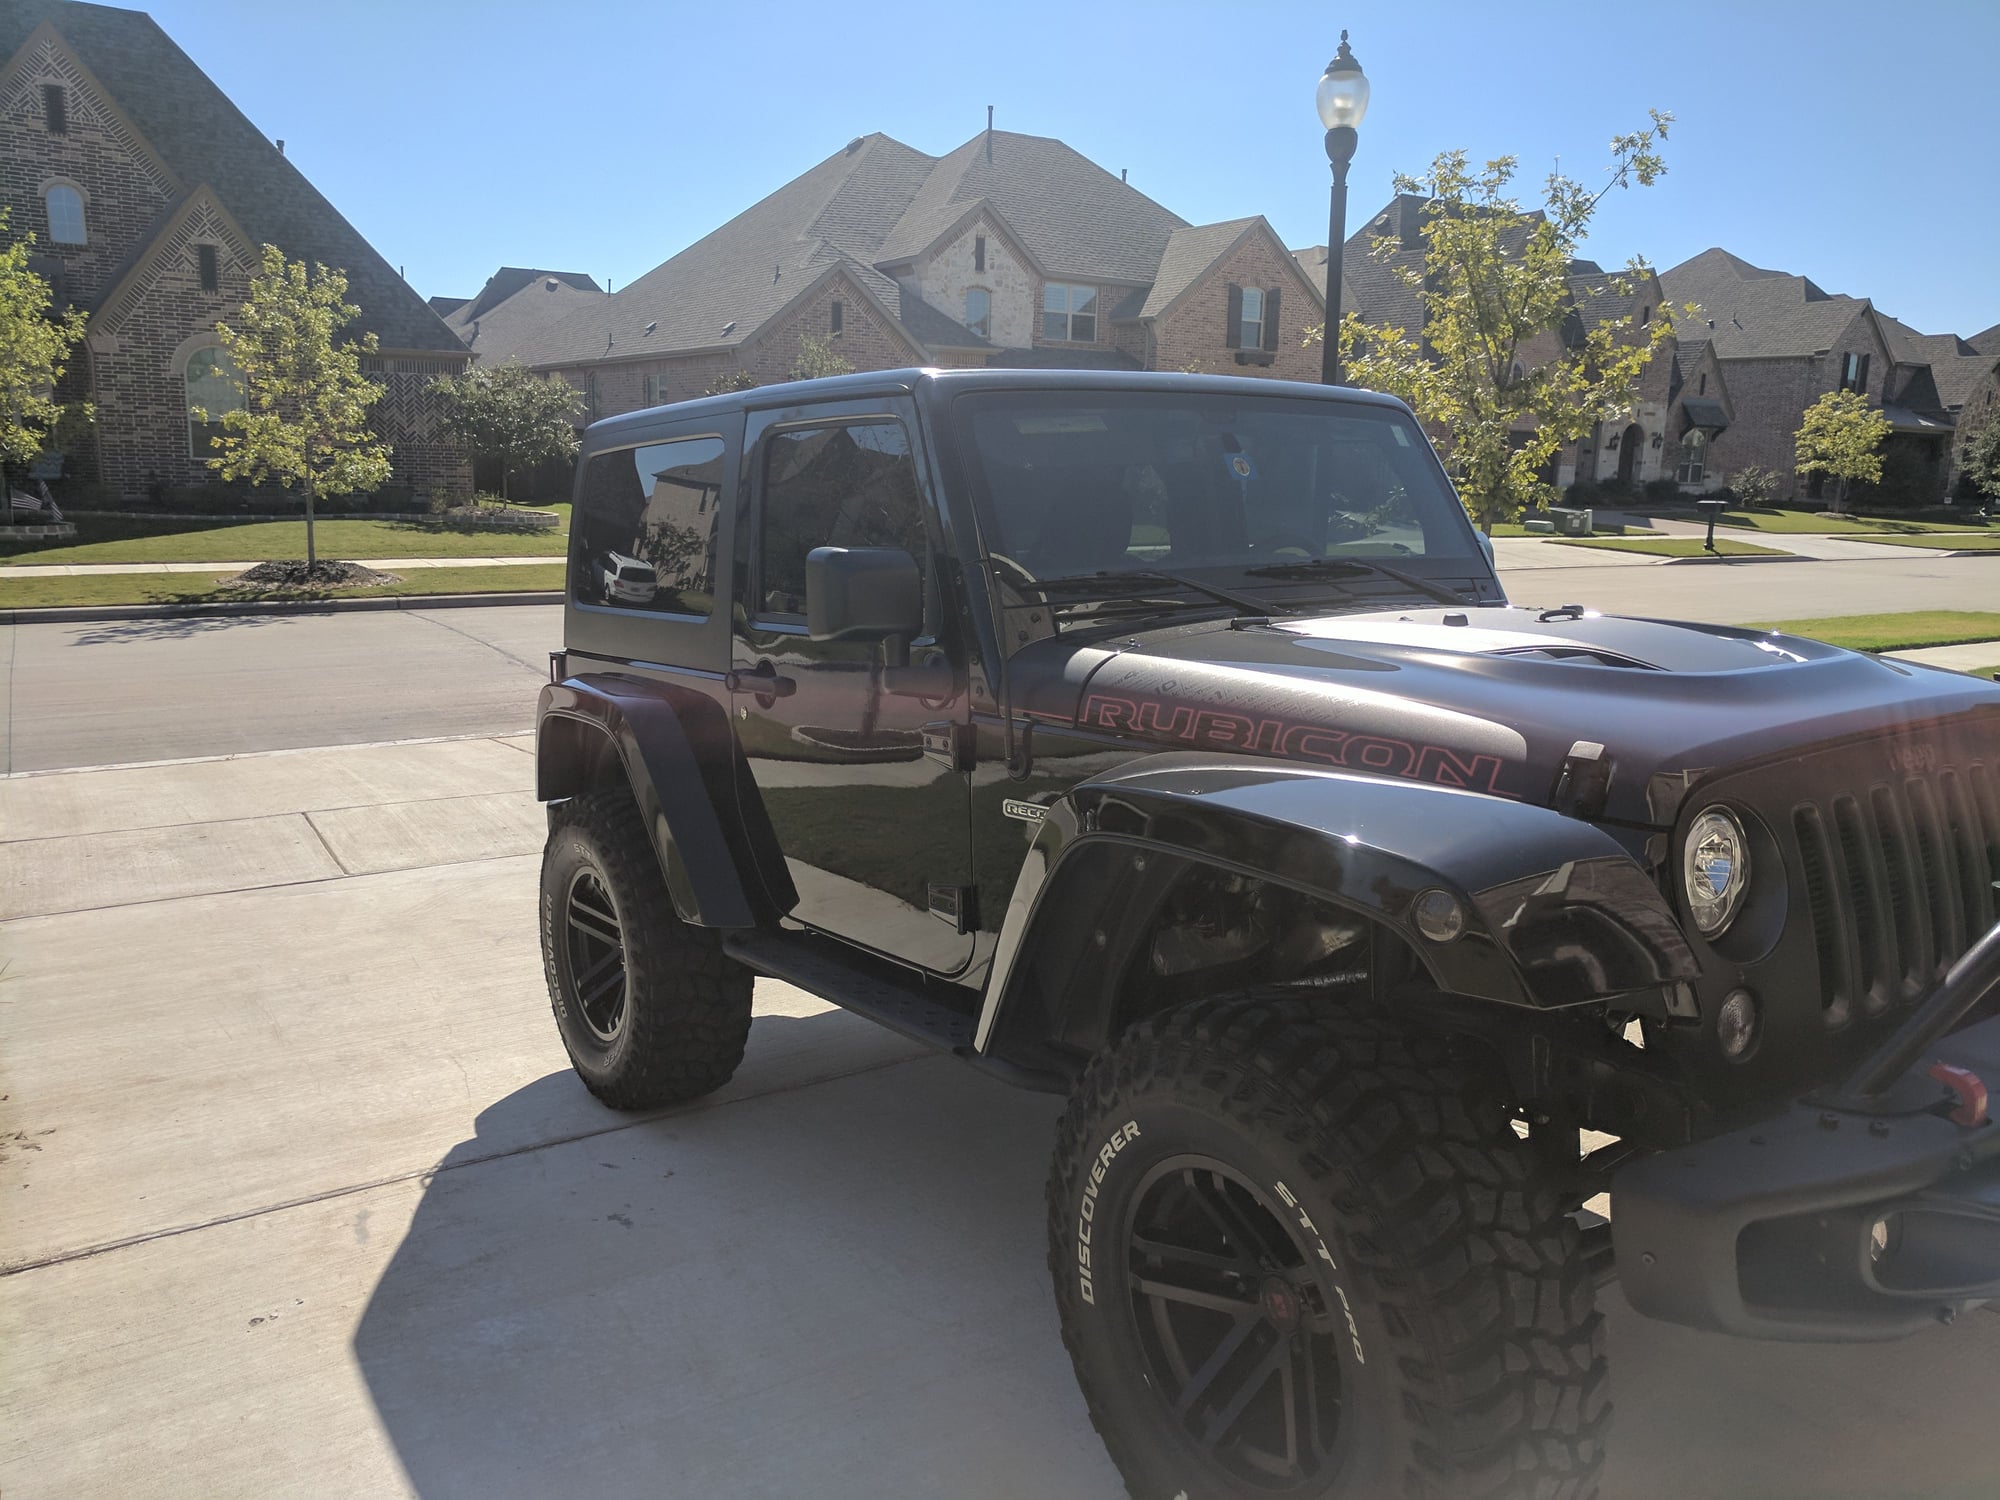 2017 Jeep Wrangler - 2017 Jeep JK Rubicon Recon Edition - Mildly Modded - Used - VIN 1C4BJWCG4HL638179 - 10,000 Miles - 6 cyl - 4WD - Automatic - SUV - Black - Prosper, TX 75078, United States